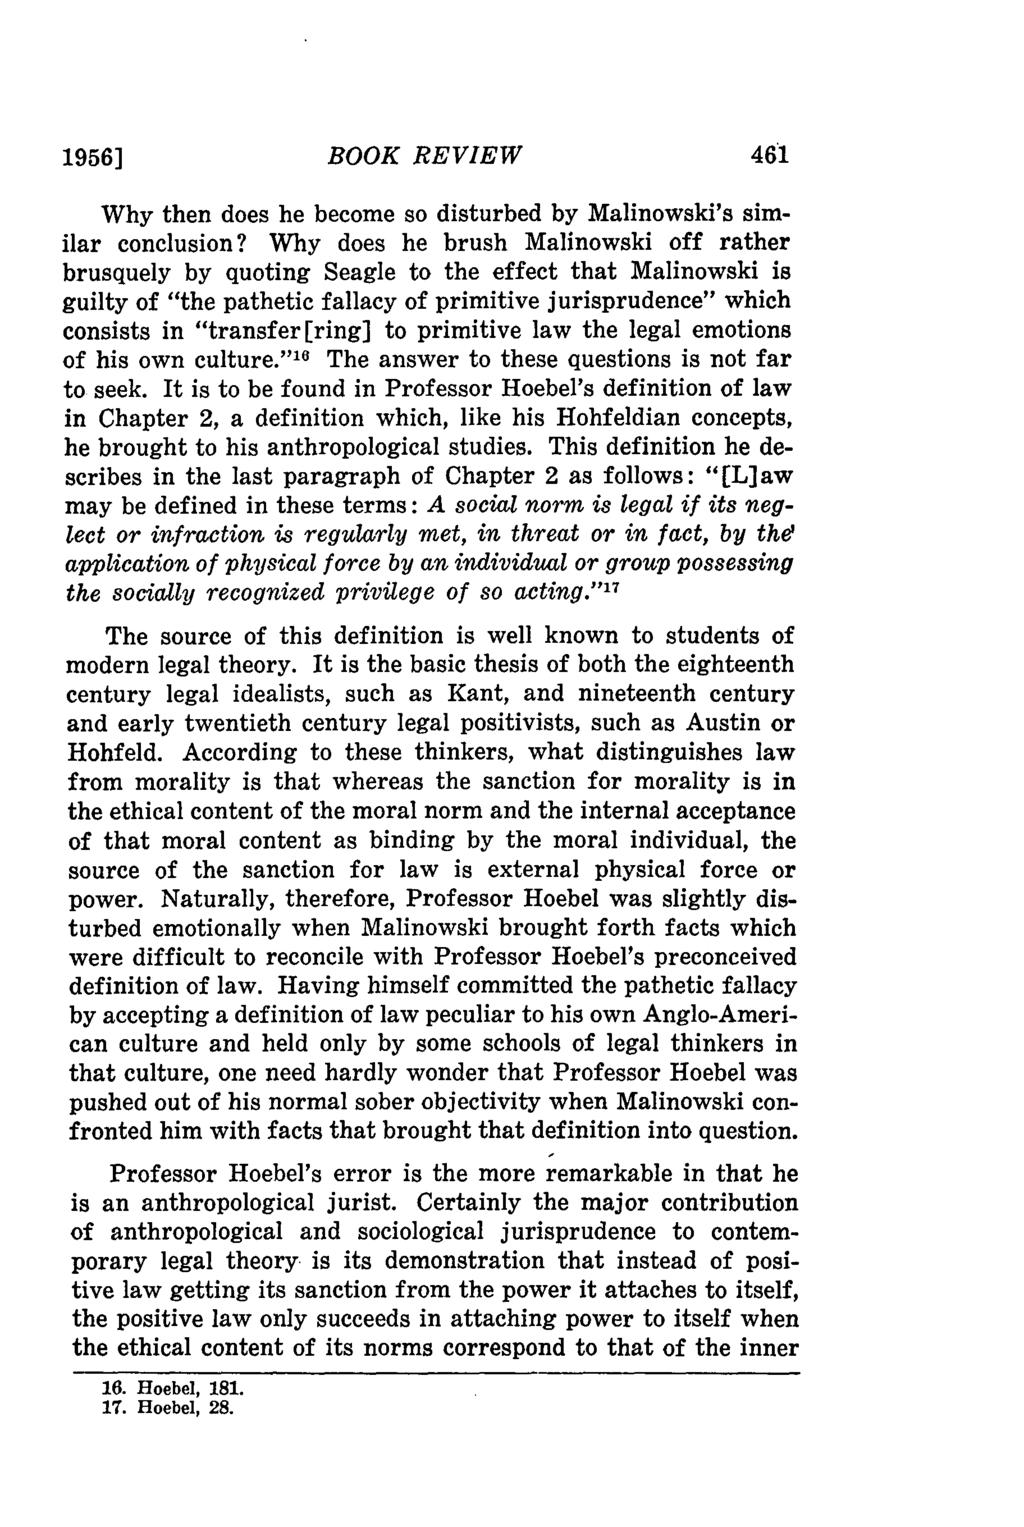 1956] BOOK REVIEW Why then does he become so disturbed by Malinowski's similar conclusion?